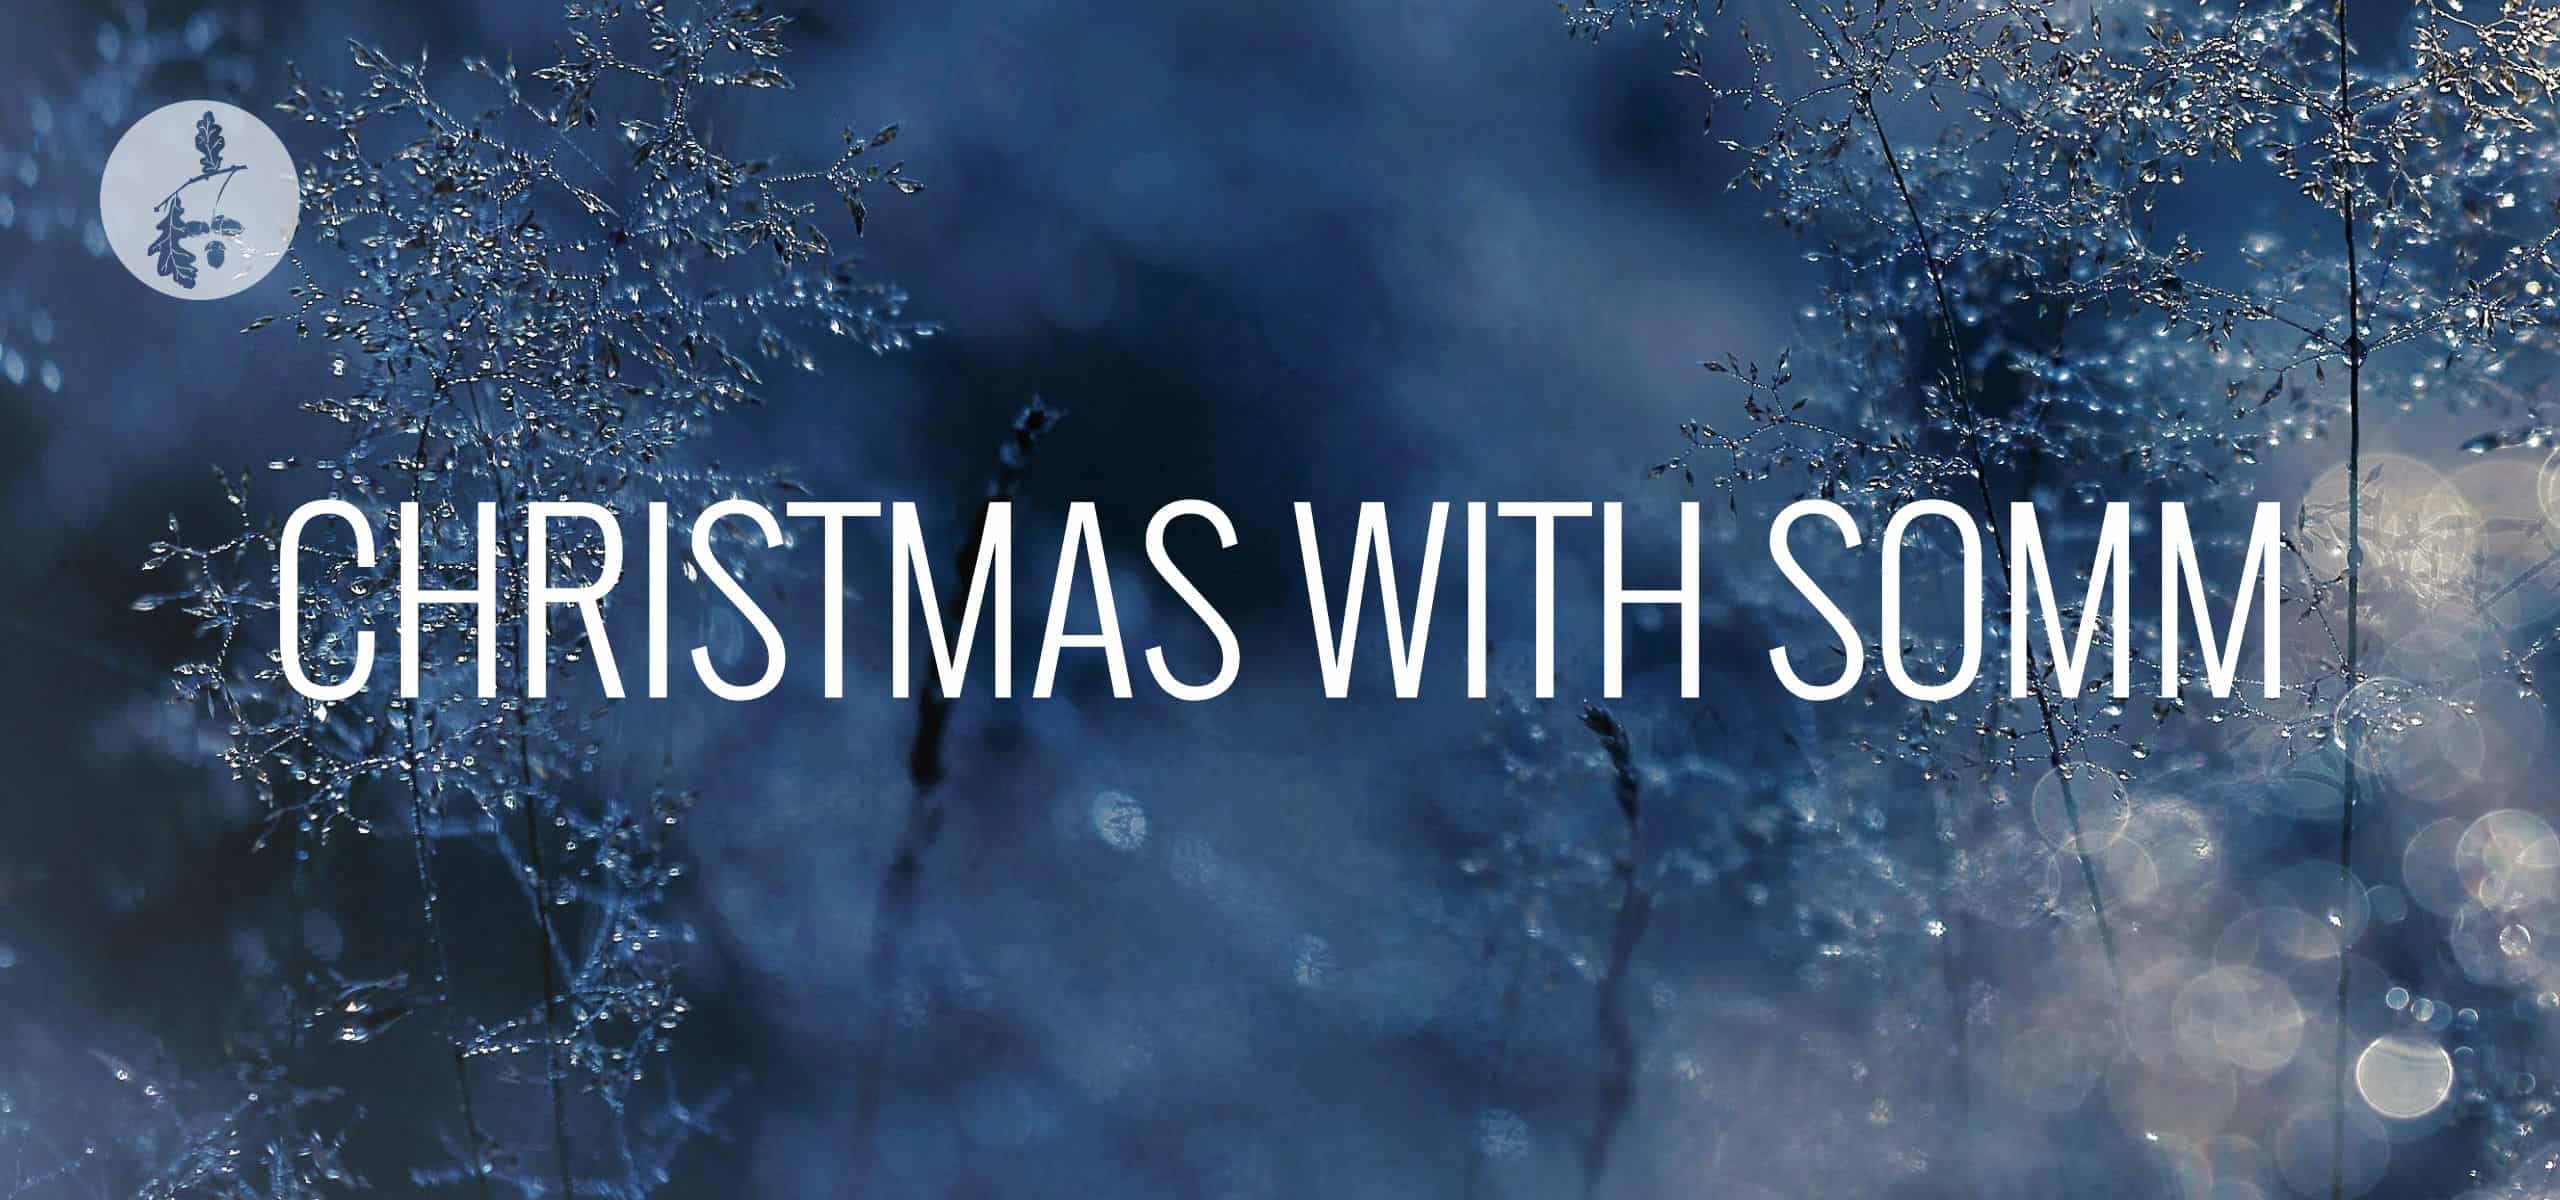 SOMM Christmas Spotify Playlist Image cover - soft snow background with title Christmas With SOMM